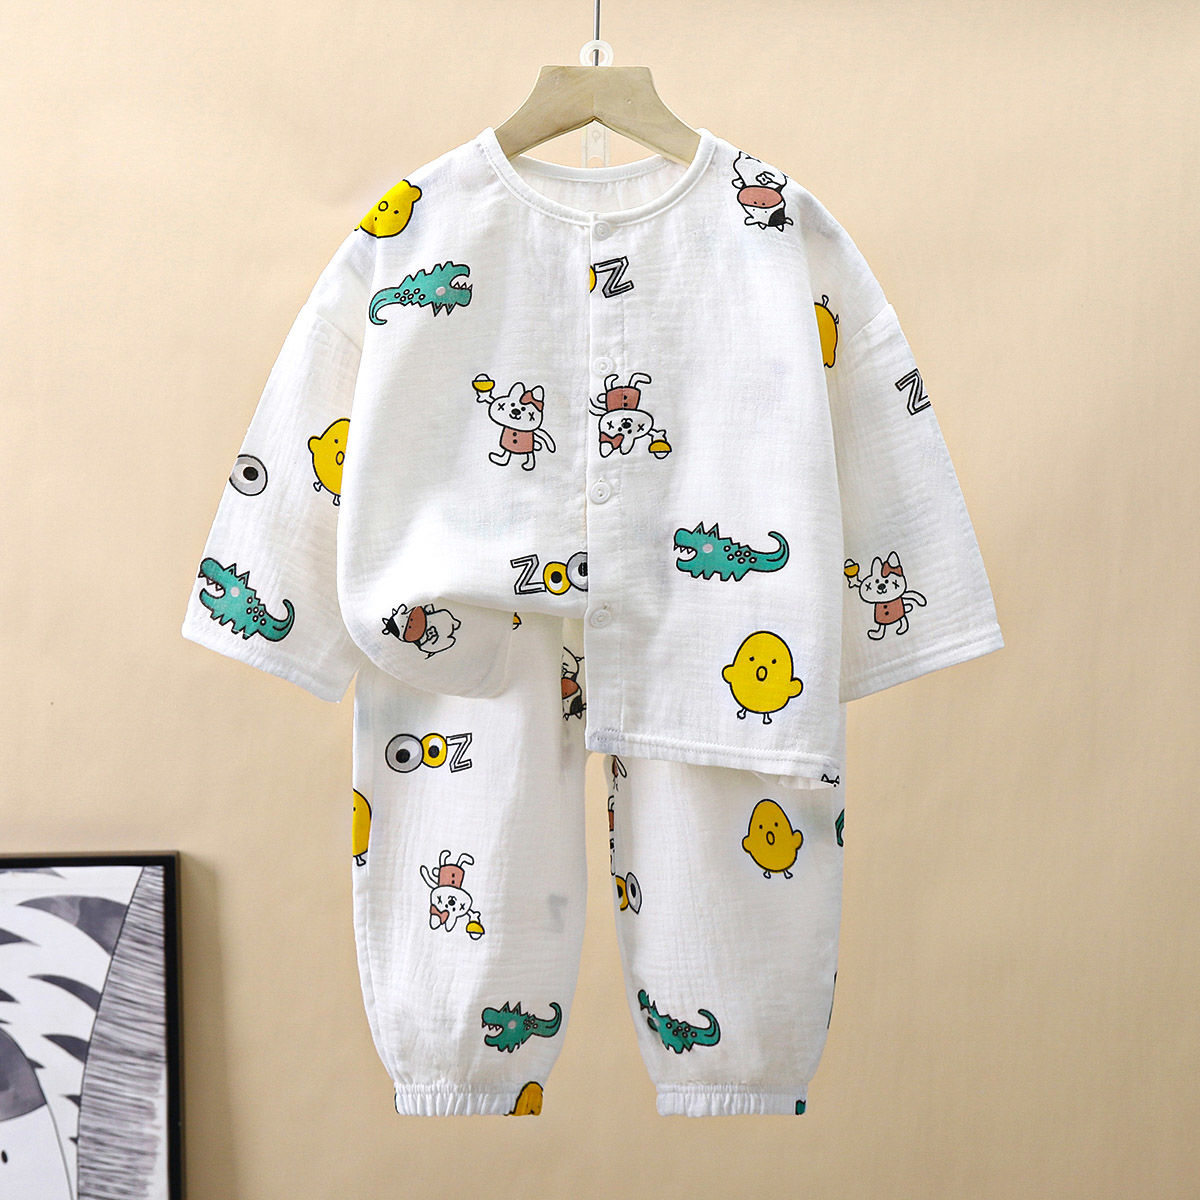 Children's thin double-layer cotton gauze three-quarter sleeve pajamas summer cotton home service men and women baby cropped pants suit